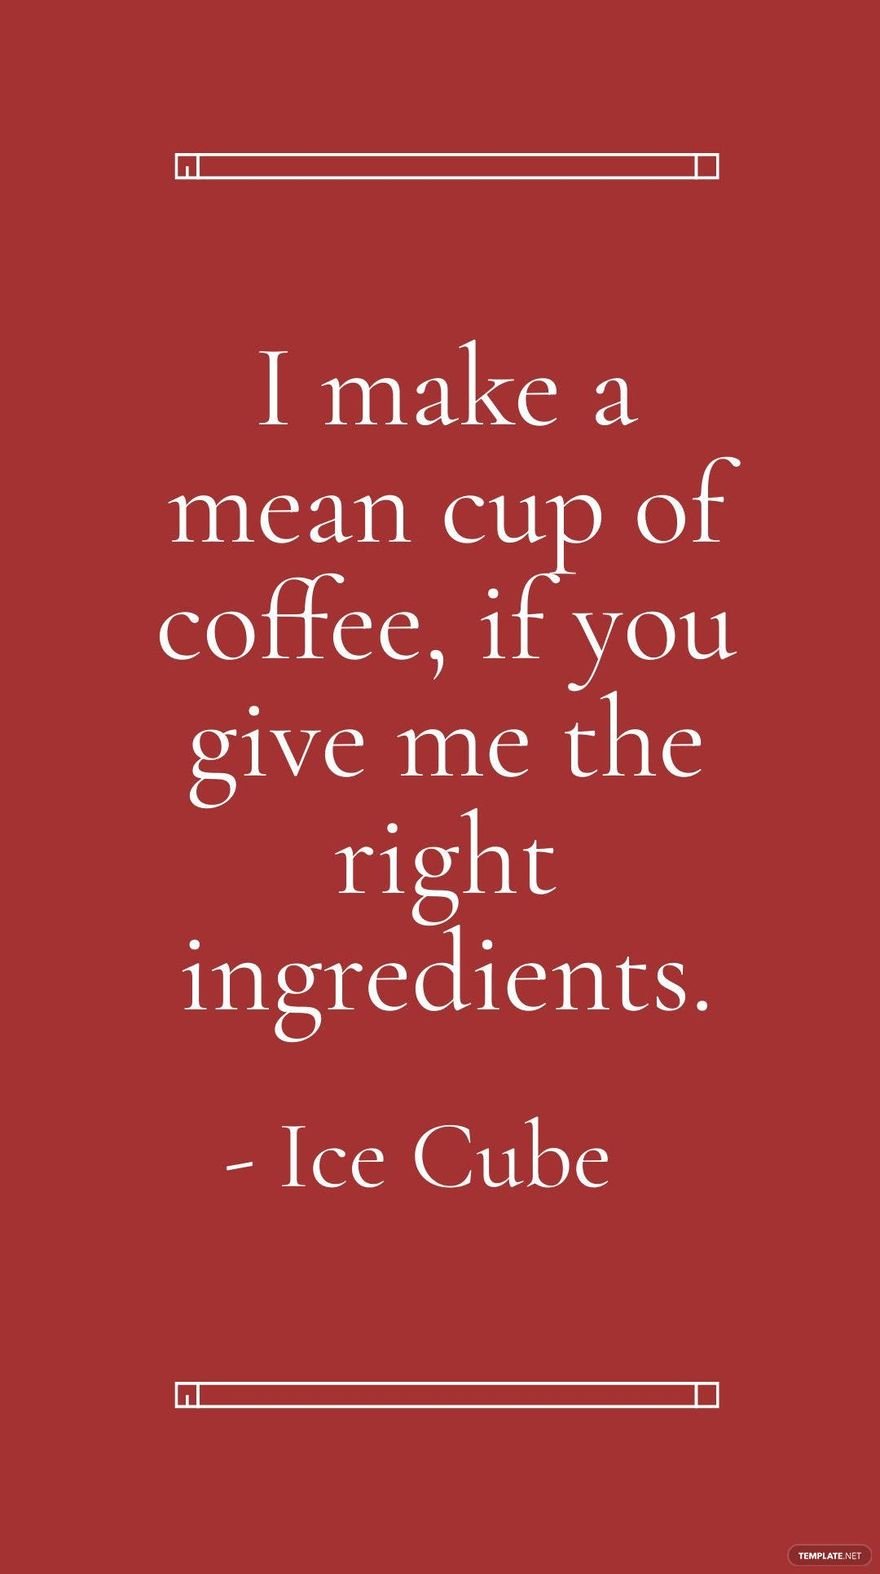 Free Ice Cube - I make a mean cup of coffee, if you give me the right ingredients. in JPG